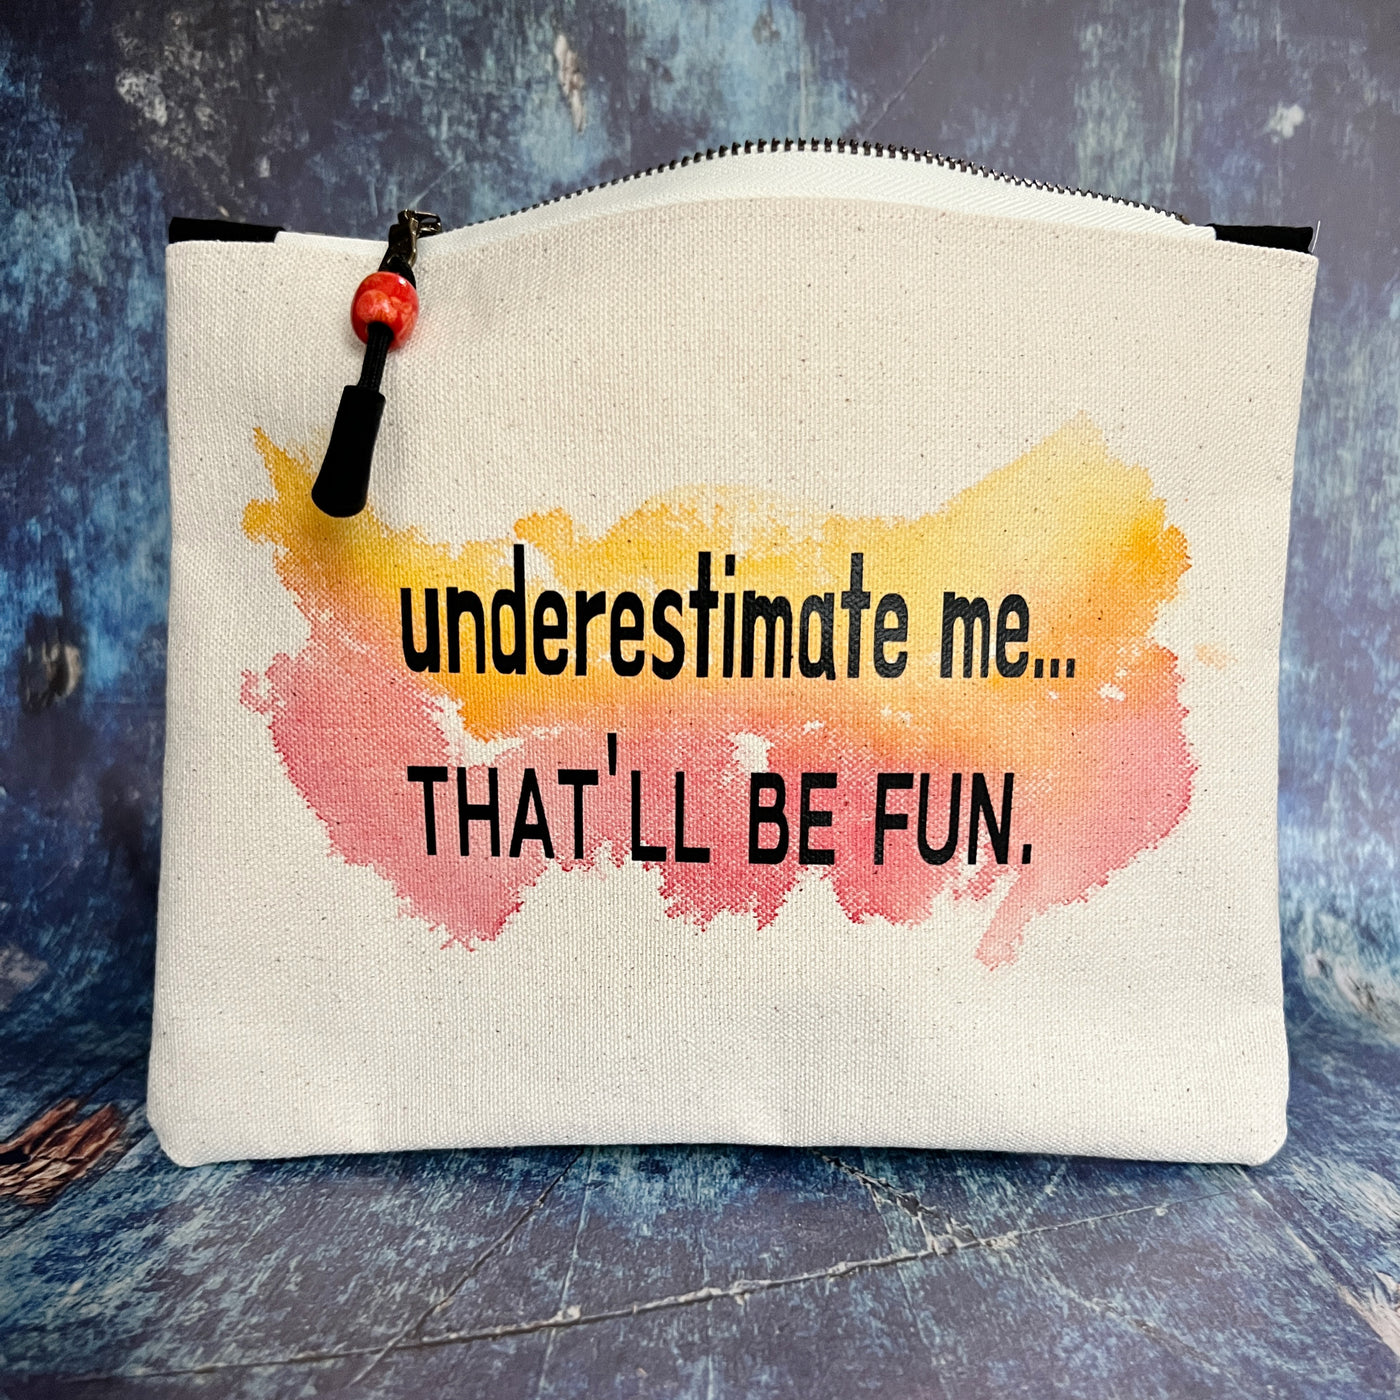 mini canvas painted zip bag - underestimate me, that'll be fun